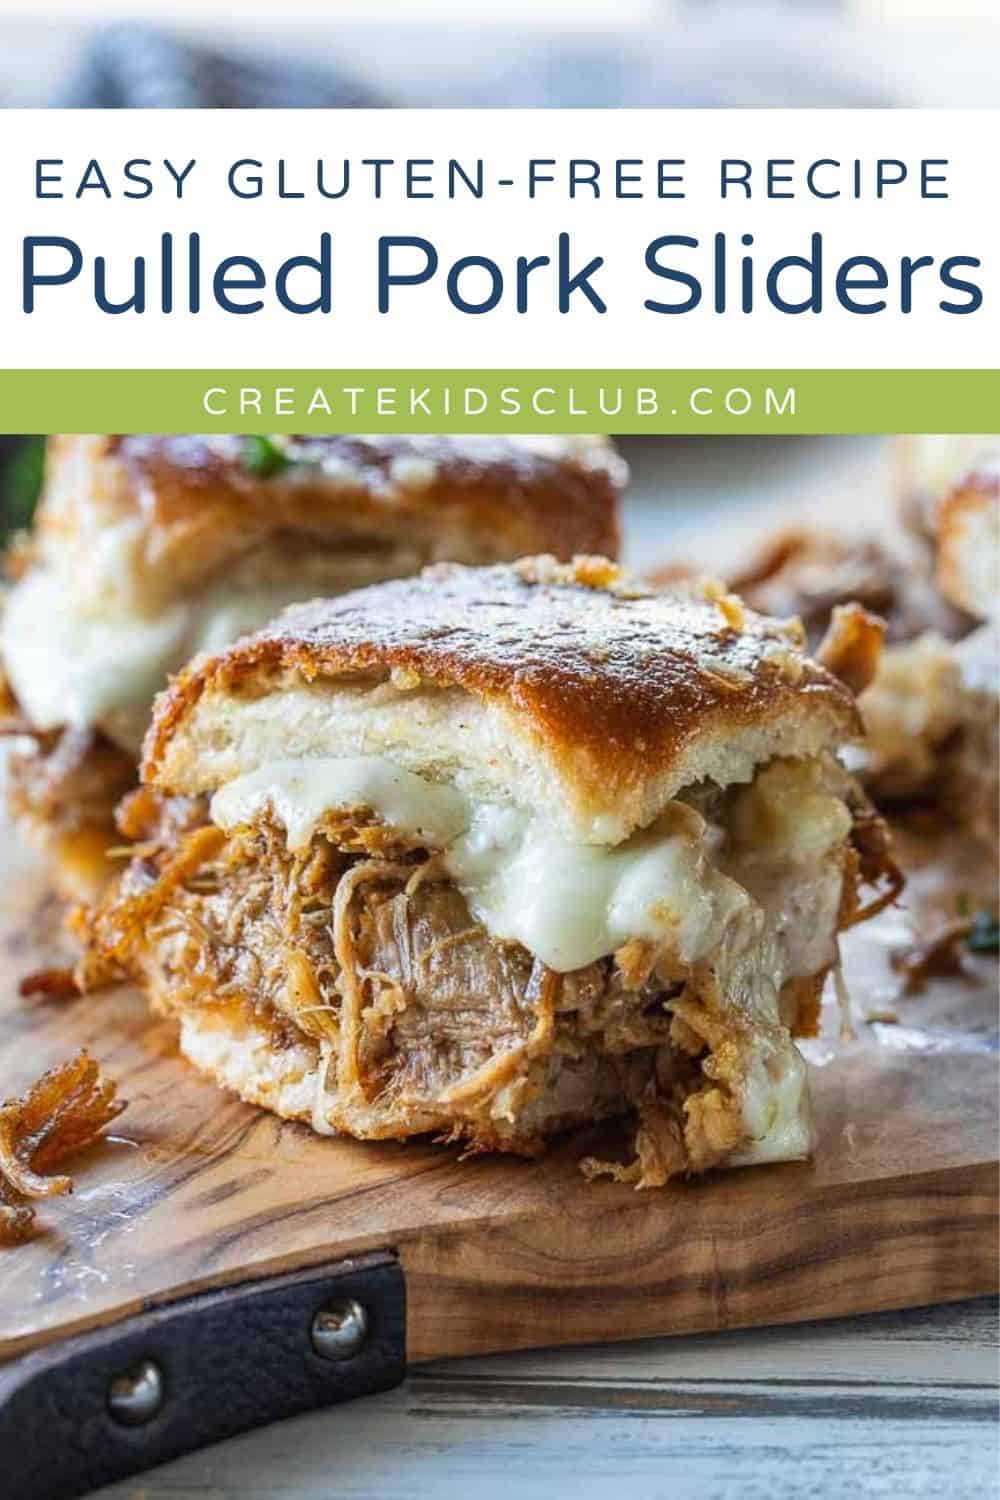 Pin of a pulled pork slider.